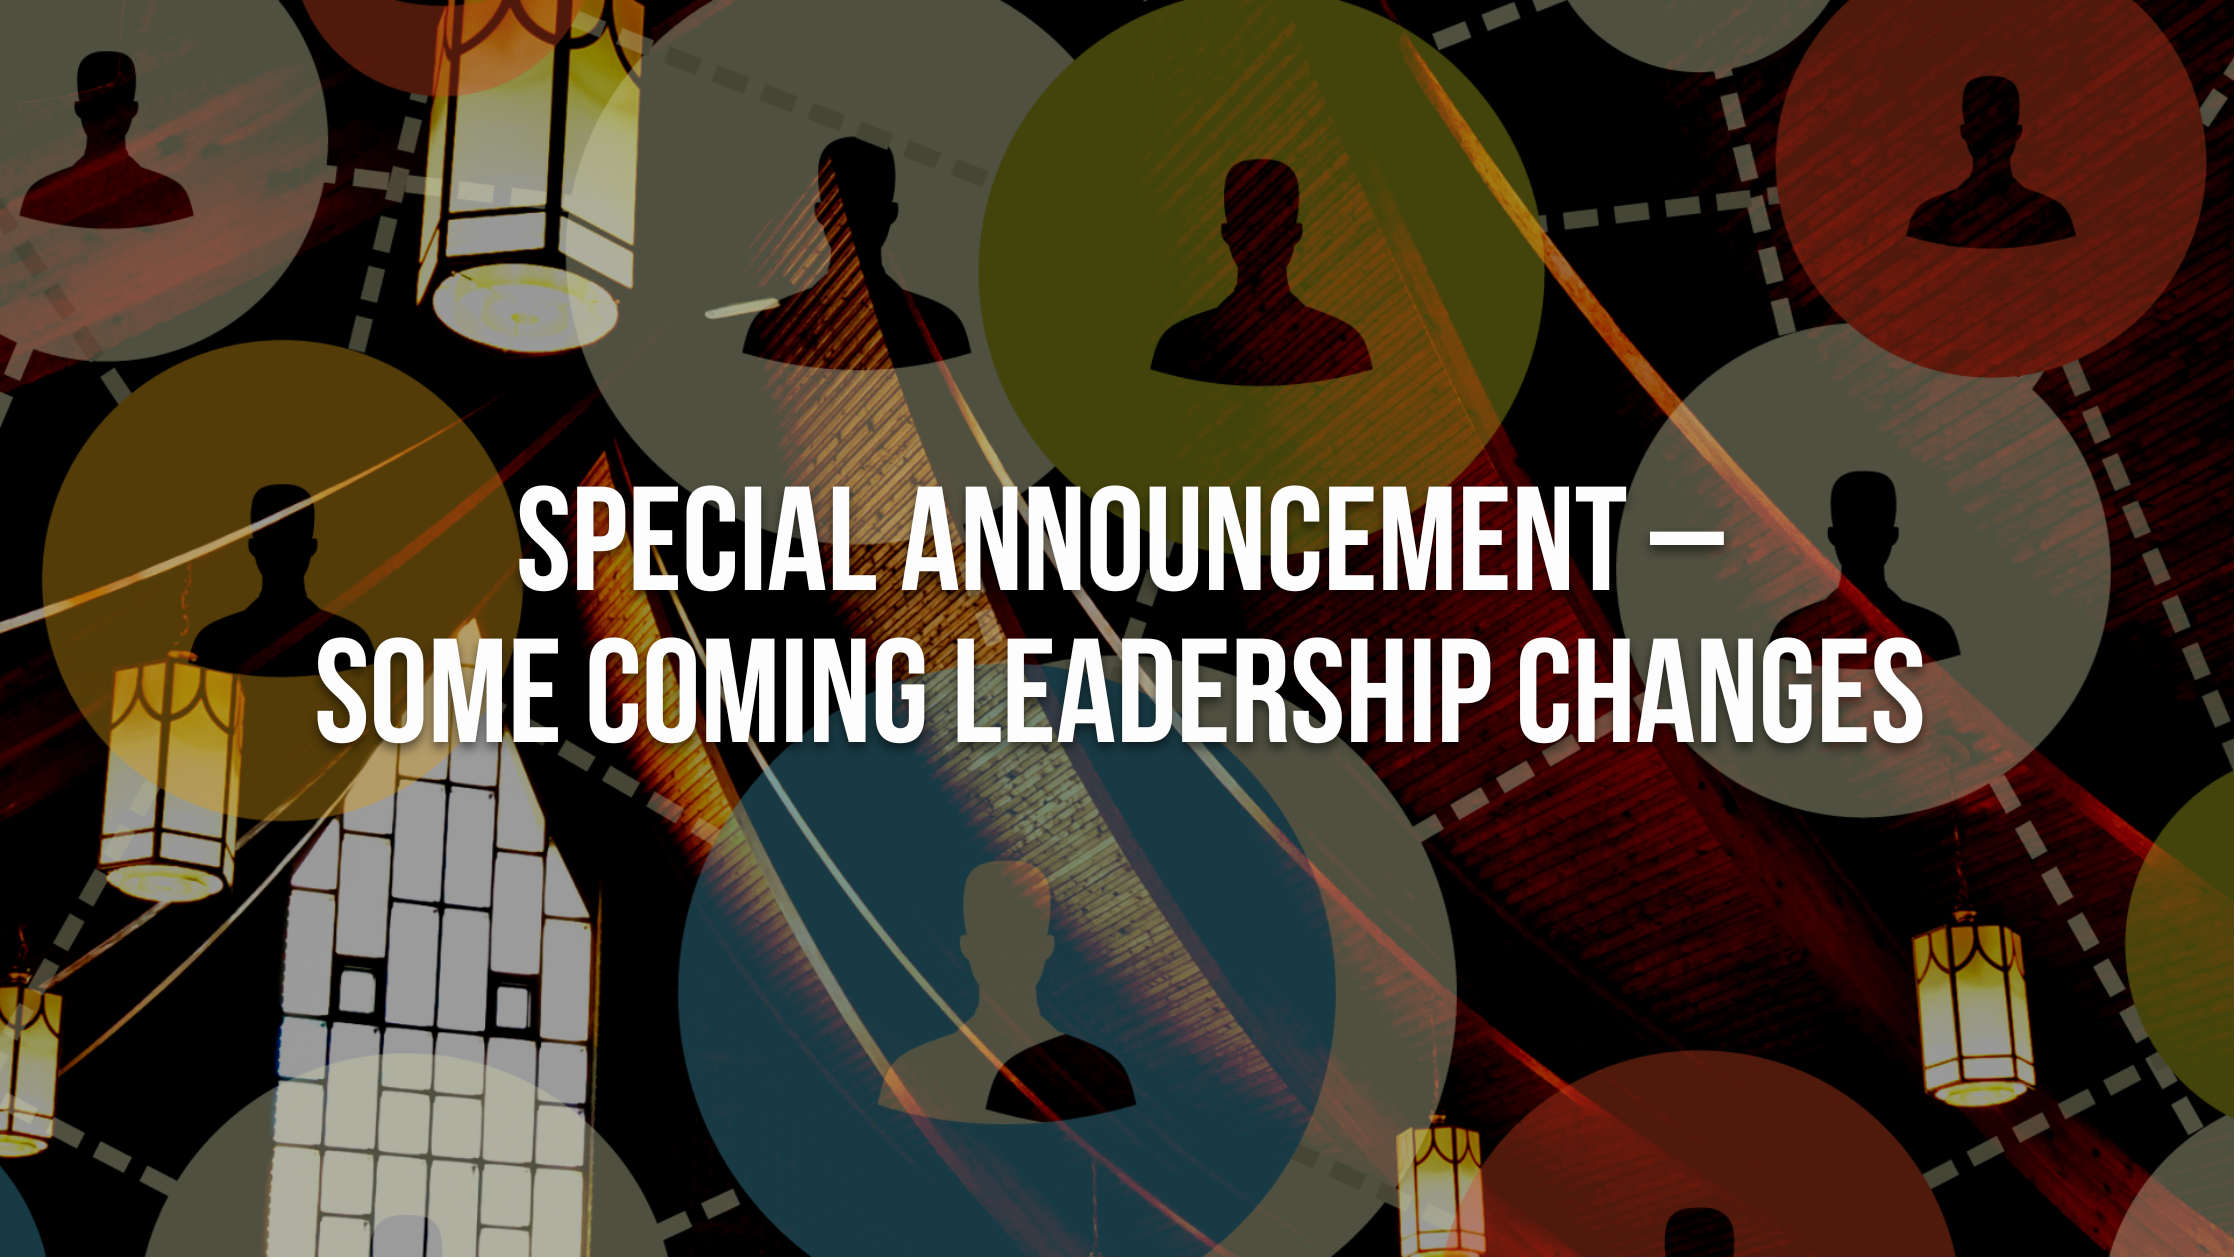 Special Announcement - Some Coming Leadership Changes